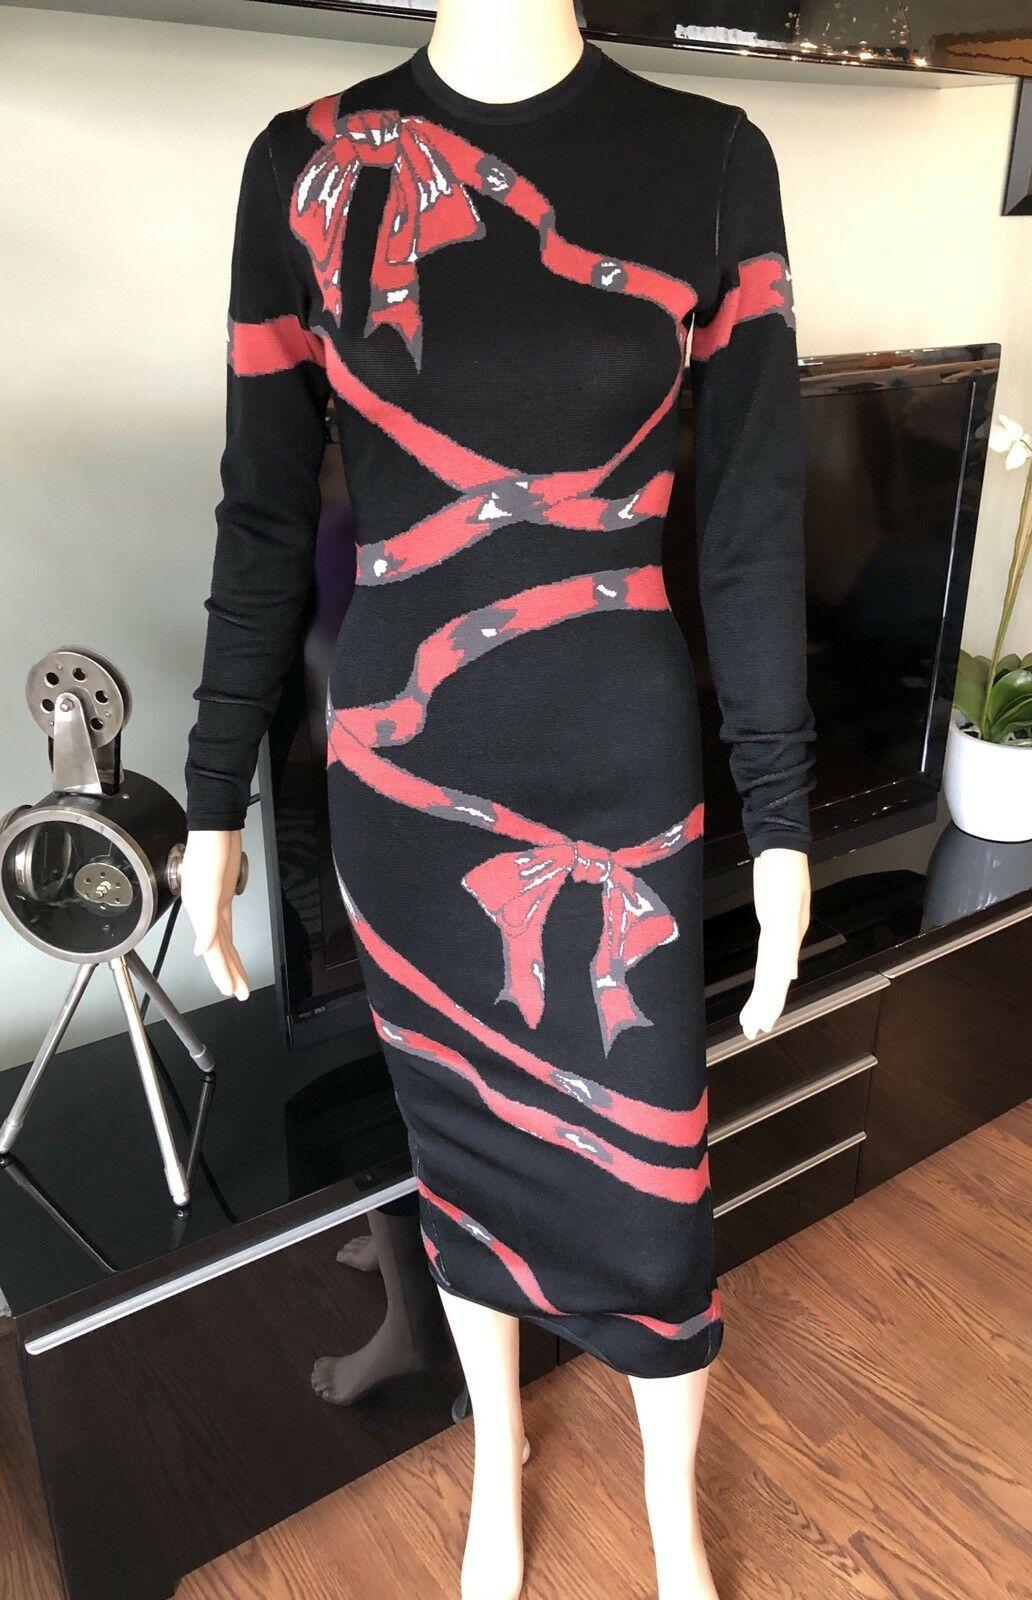 Azzedine Alaia Vintage F/W 1992 Runway Fitted Bow Ribbon Wrapped Dress Size Small

Alaïa long sleeve midi dress featuring bow print throughout, crew neck and concealed zip closure at back.

All Eyes on Alaïa
For the last half-century, the world’s